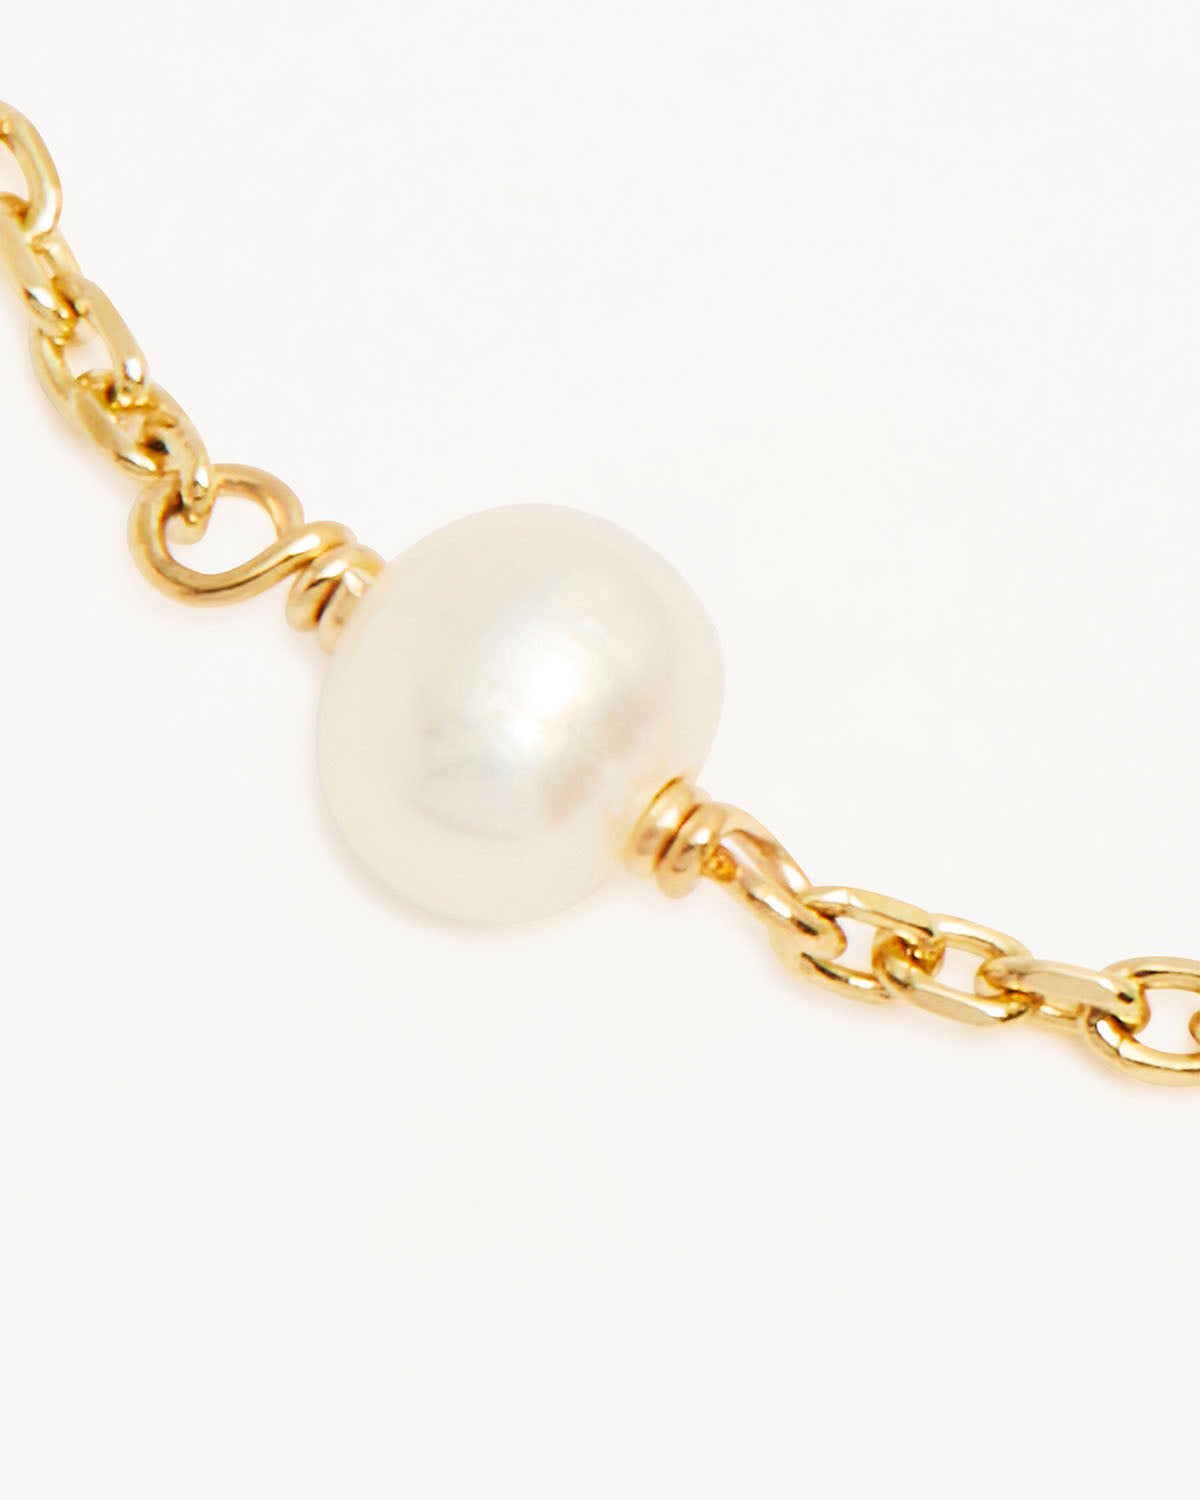 NEW HUGE NATURAL 11 - 13MM australia seas of the south white pearl bracelet  8inches leopard clasp - AliExpress